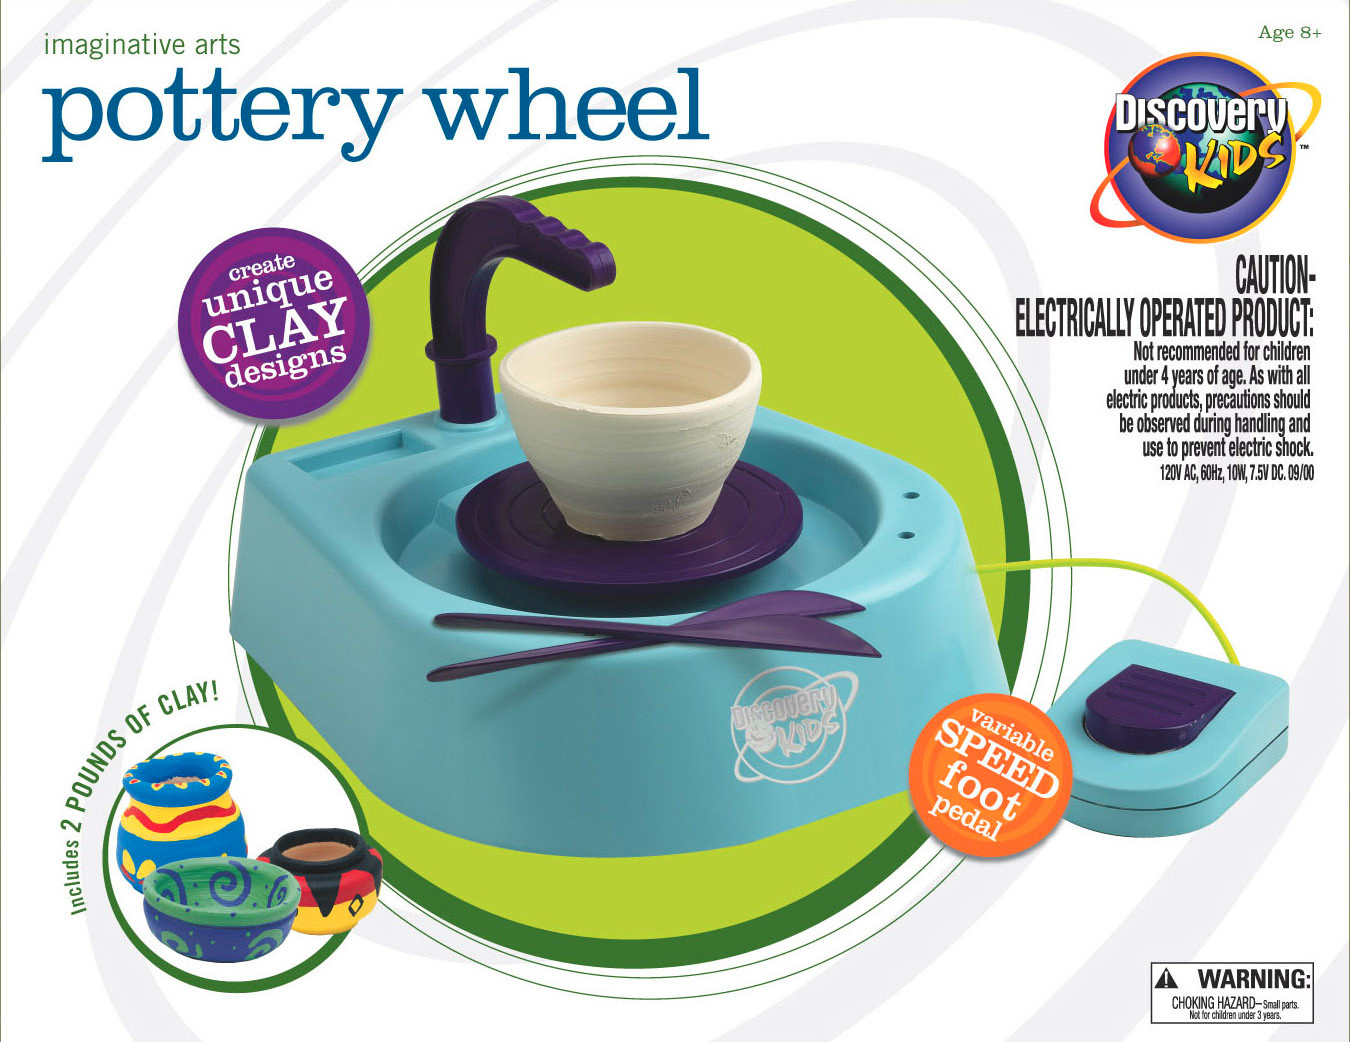 Picture of recalled Pottery Wheel Kit